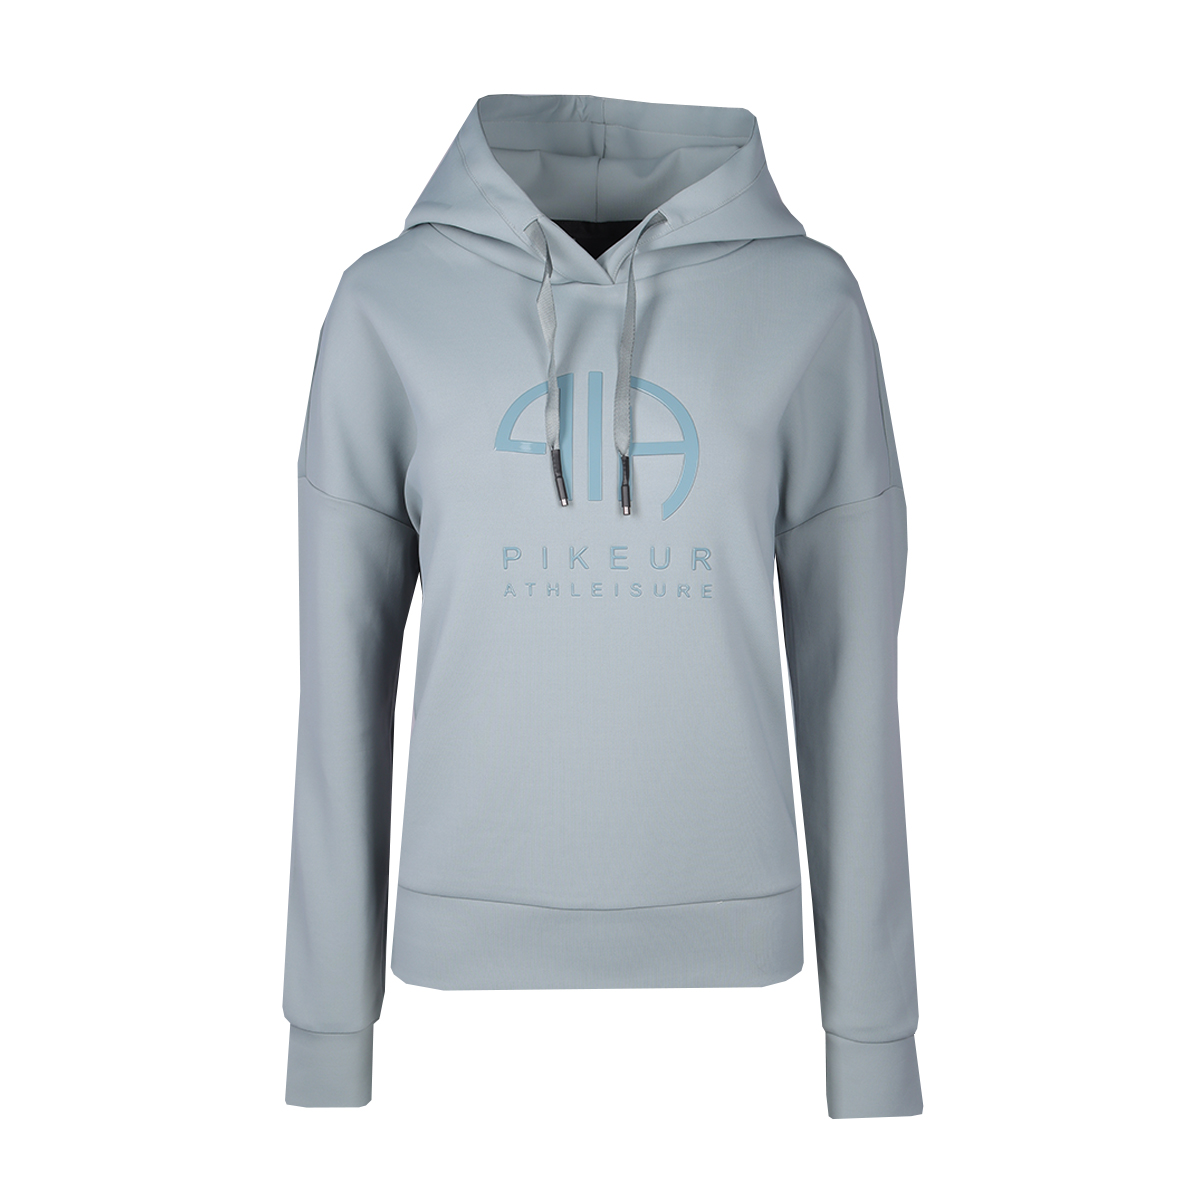 Hoodie Pikeur Athleisure Turquoise, 40 in turquoise